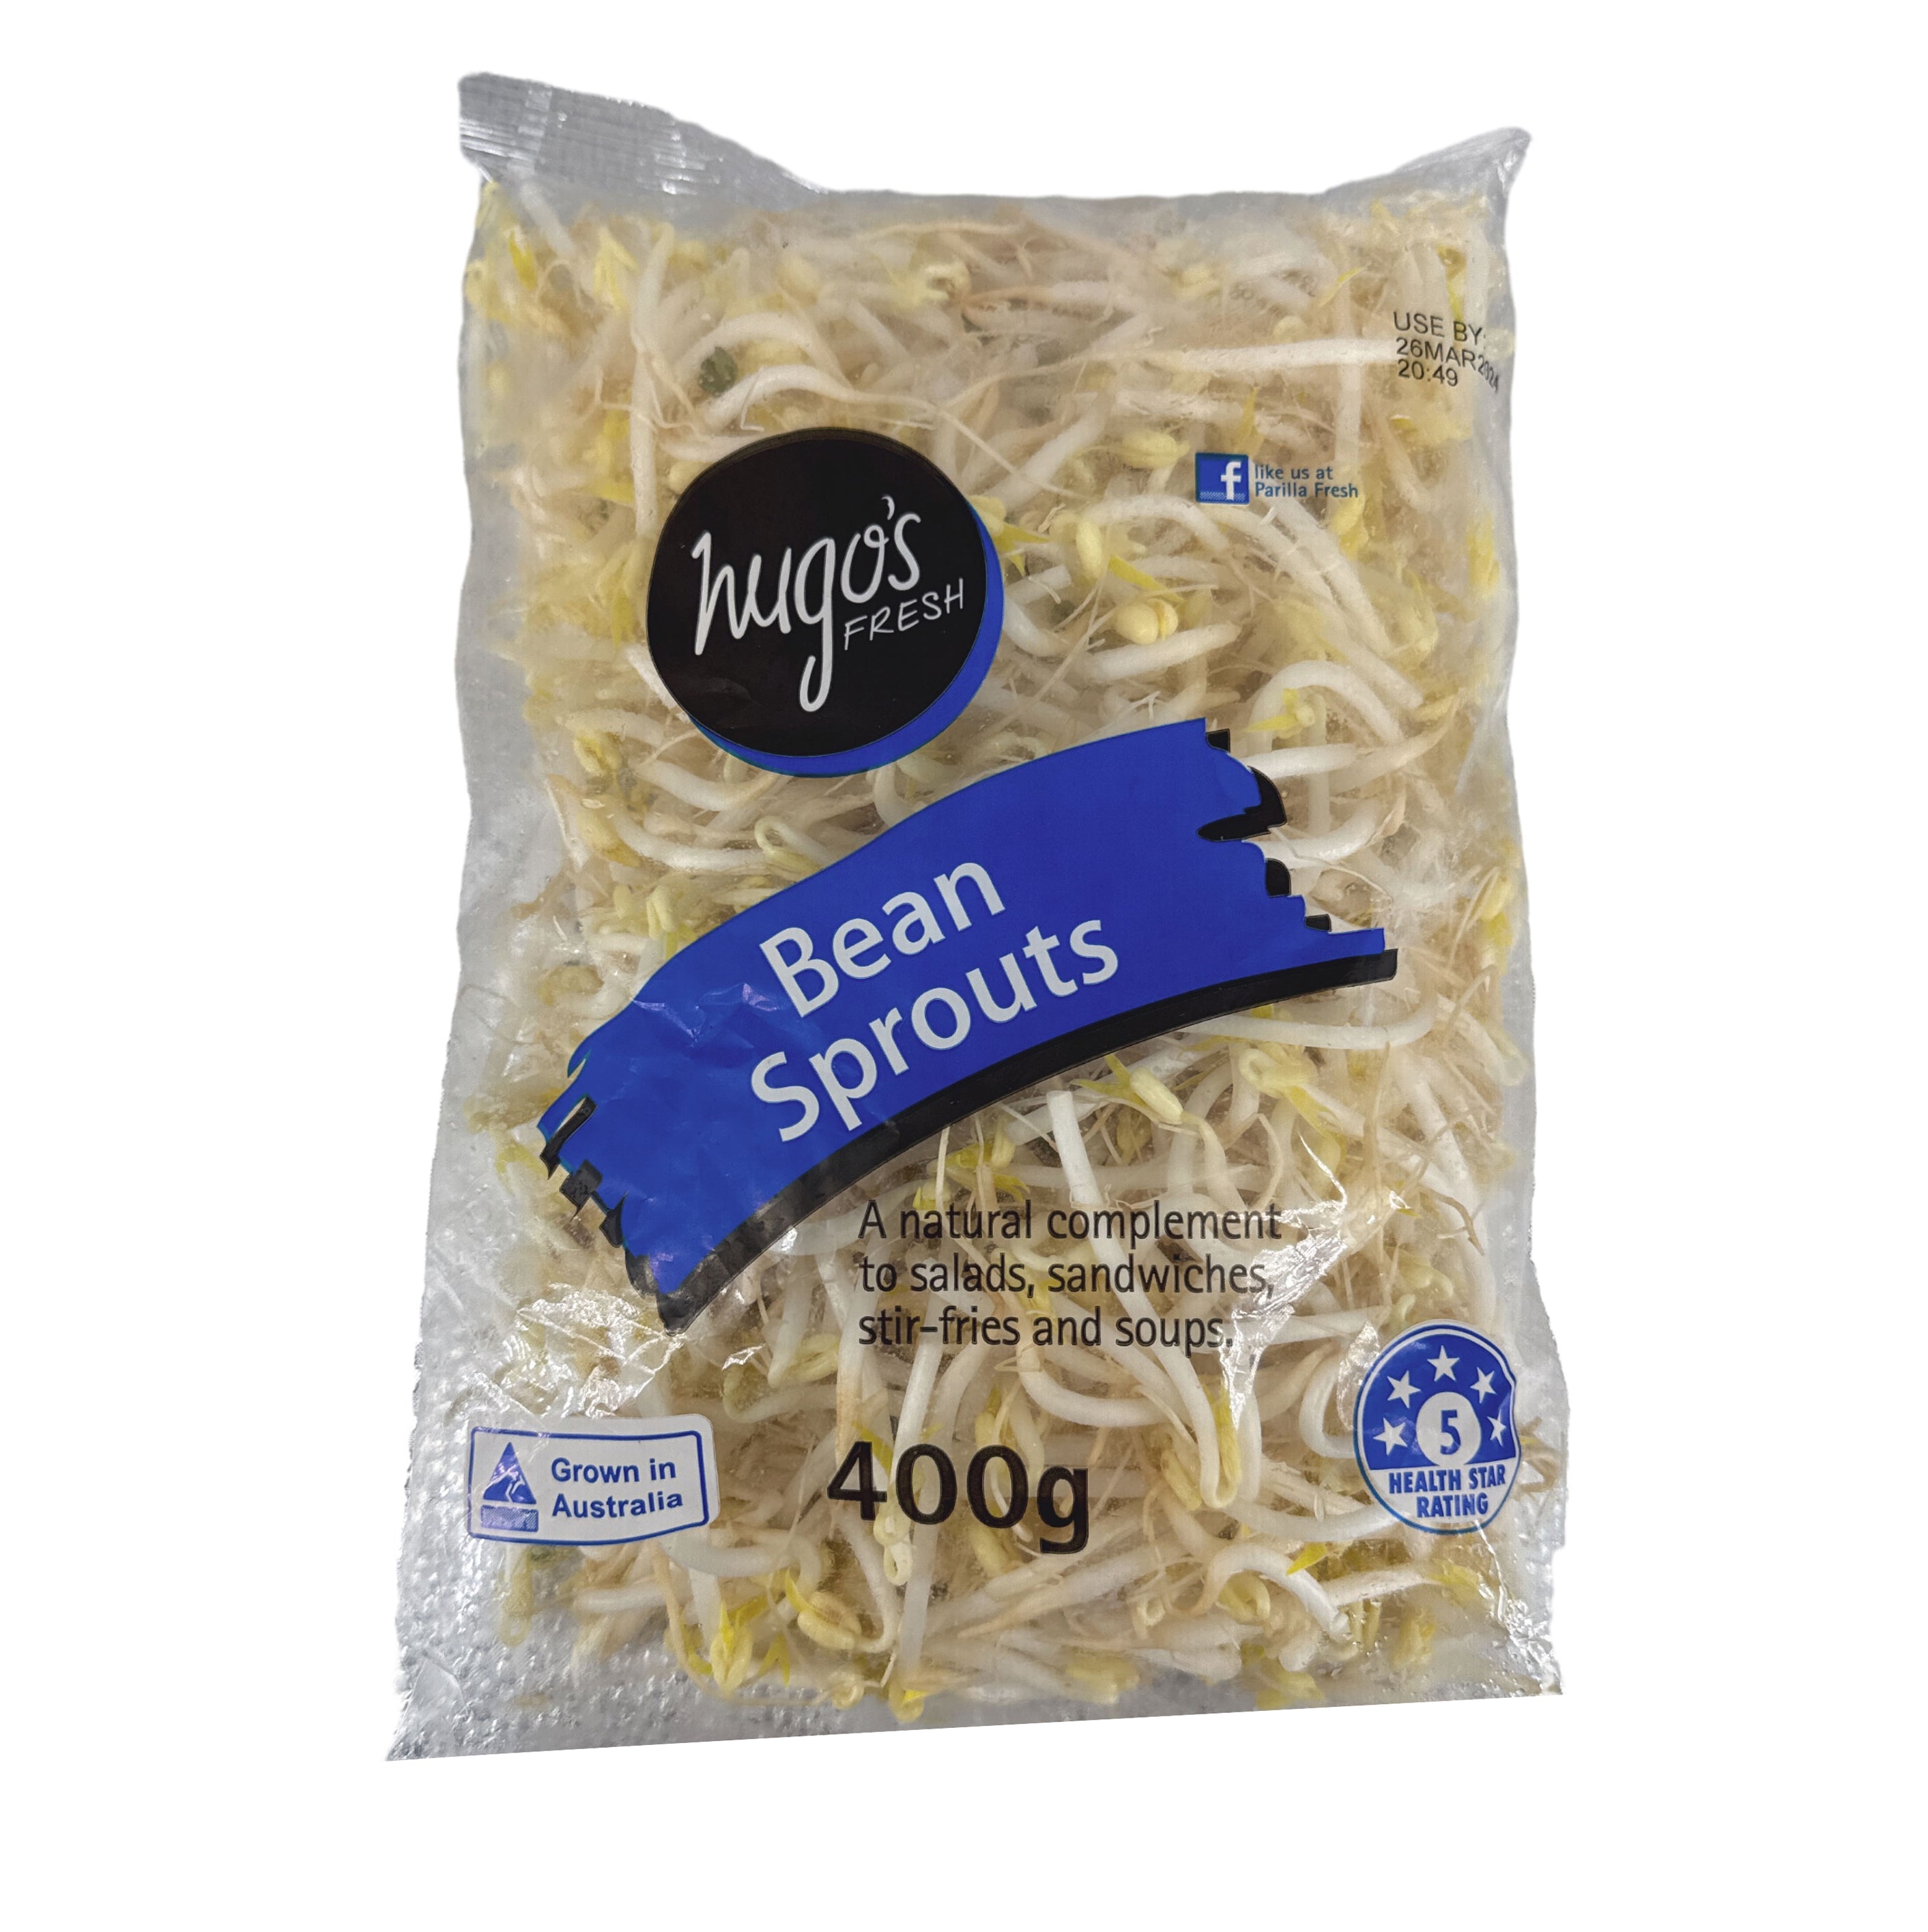 [Fresh]-Bean-Sprouts-Approximately-400g-1